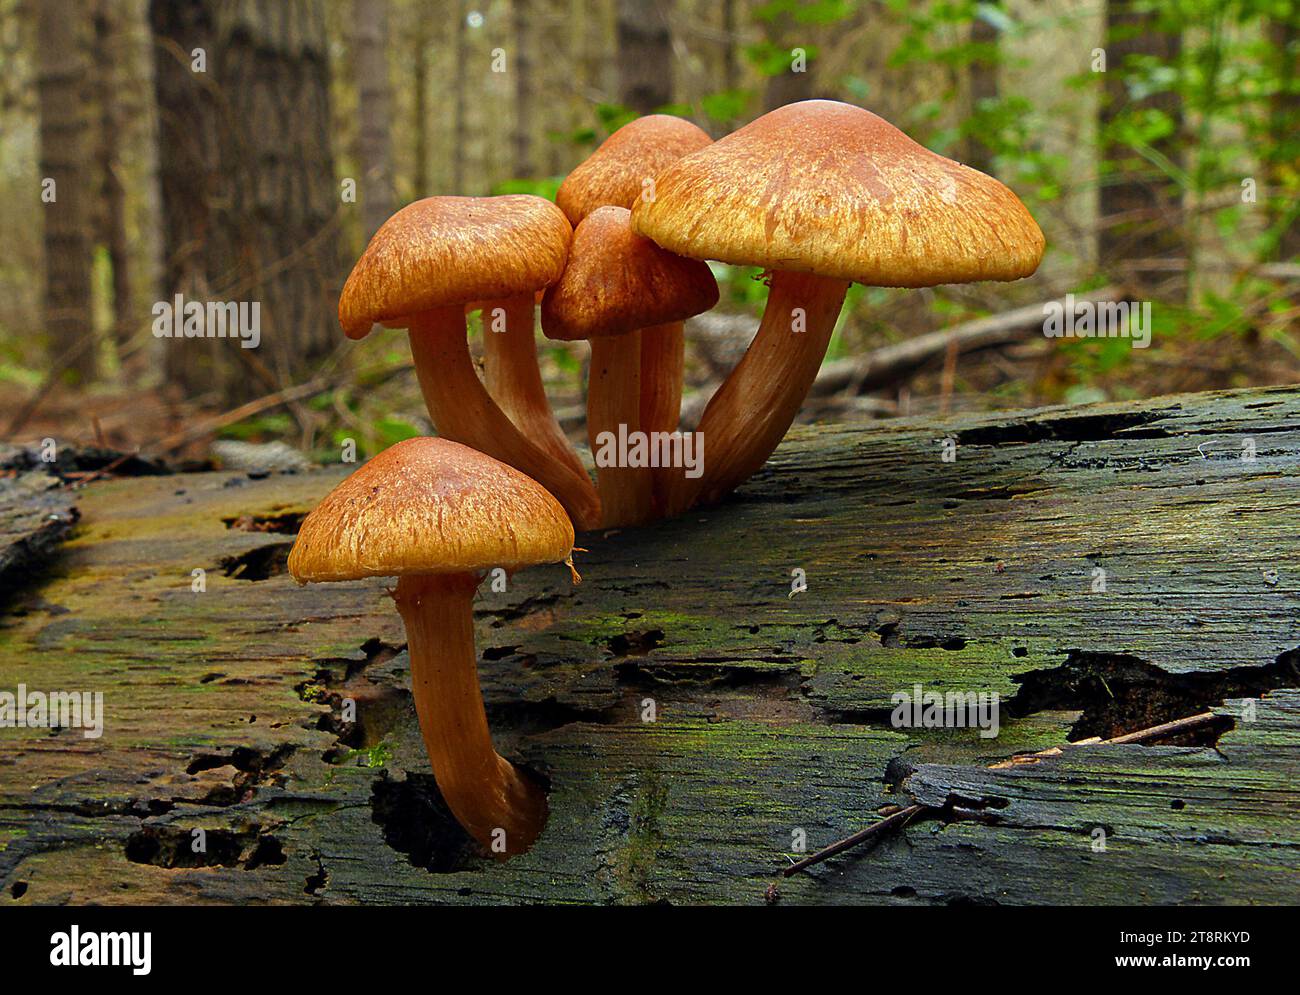 Gymnopilus, Gymnopilus is a genus of gilled mushrooms within the fungal family Strophariaceae containing about 200 rusty-orange spored mushroom species formerly divided among Pholiota and the defunct genus Stock Photo